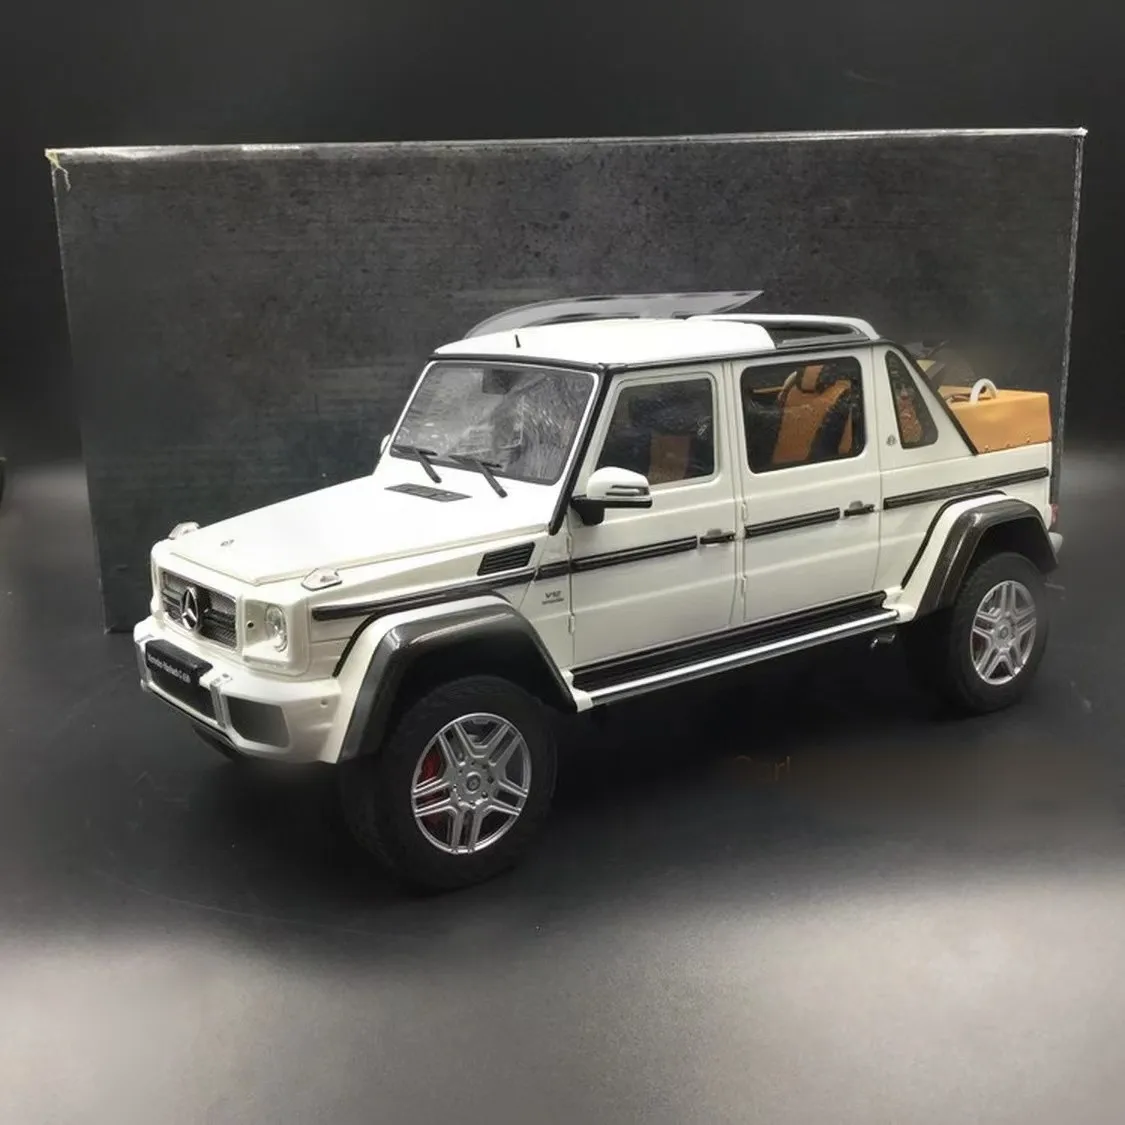 

HeyToys GT Spirit 1/18 Maybach G650 Landaulet KJ022 Asia Exclusive DieCast Model Car Collection Limited Edition Toy Car